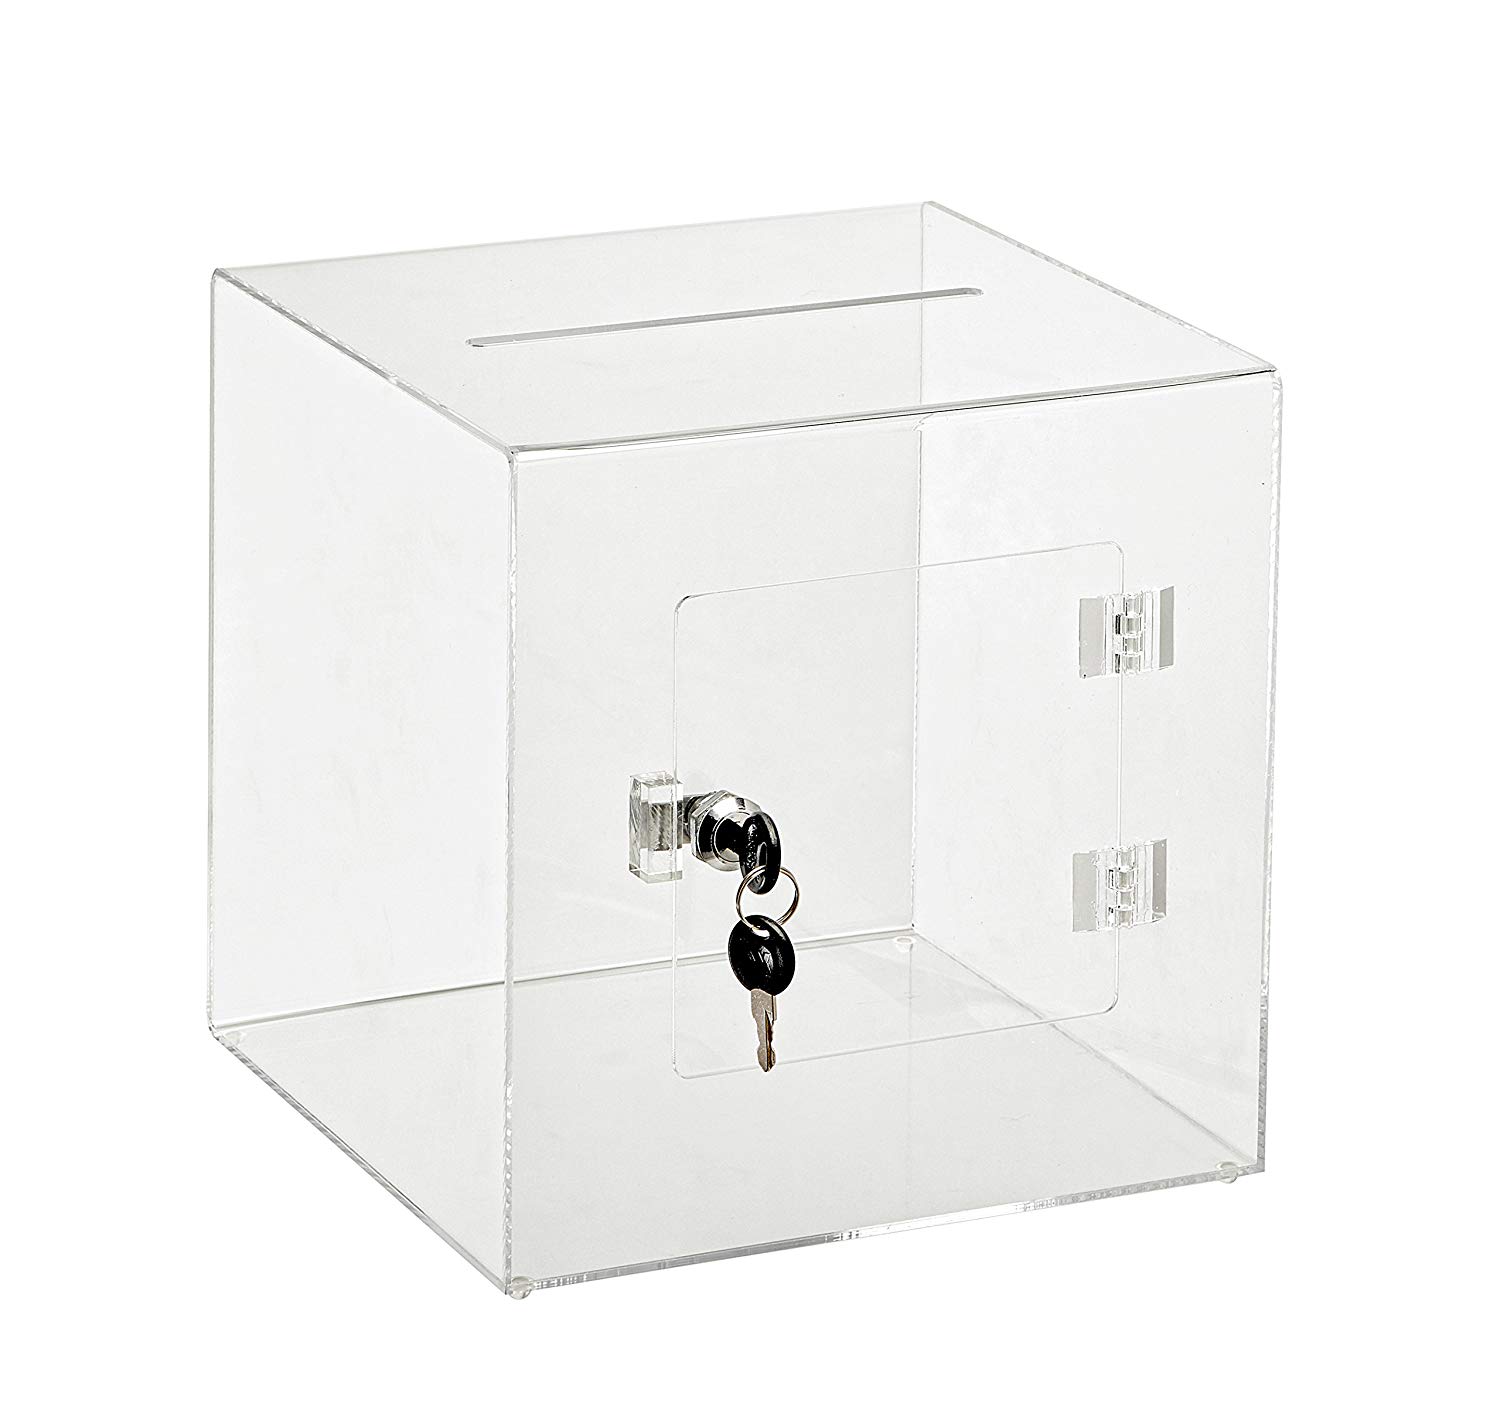 Ideal for Voting Charity & Suggestion Collection Durable Acrylic Box with Lock AdirOffice 10 x 10 Acrylic Ballot Box Donation Box with Easy Open Rear Door Crystal Blue